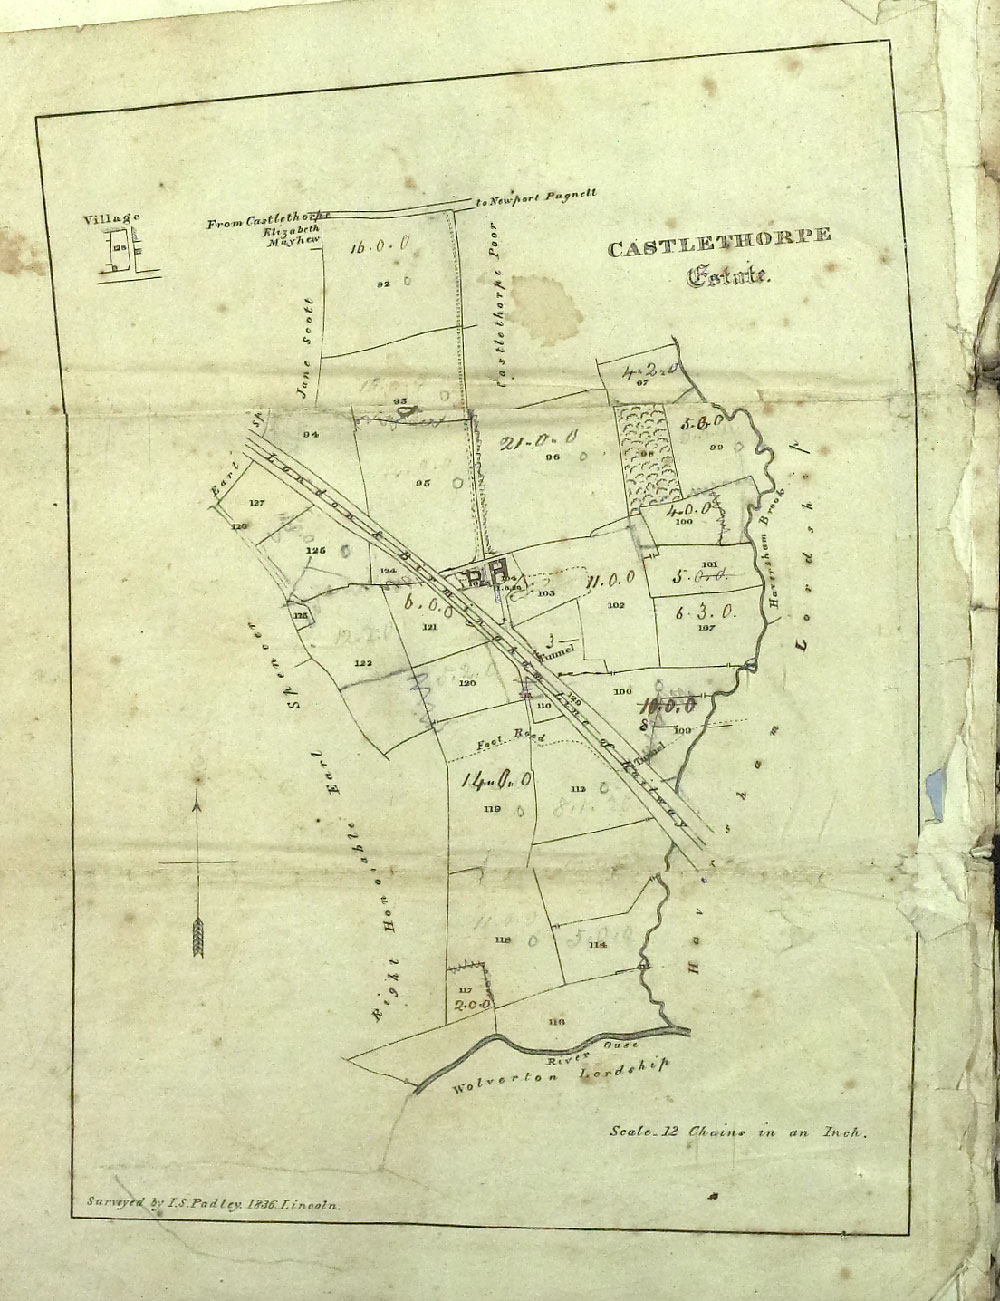 Particulars of Sale 1837, page 10: map of estate in Castlethorpe